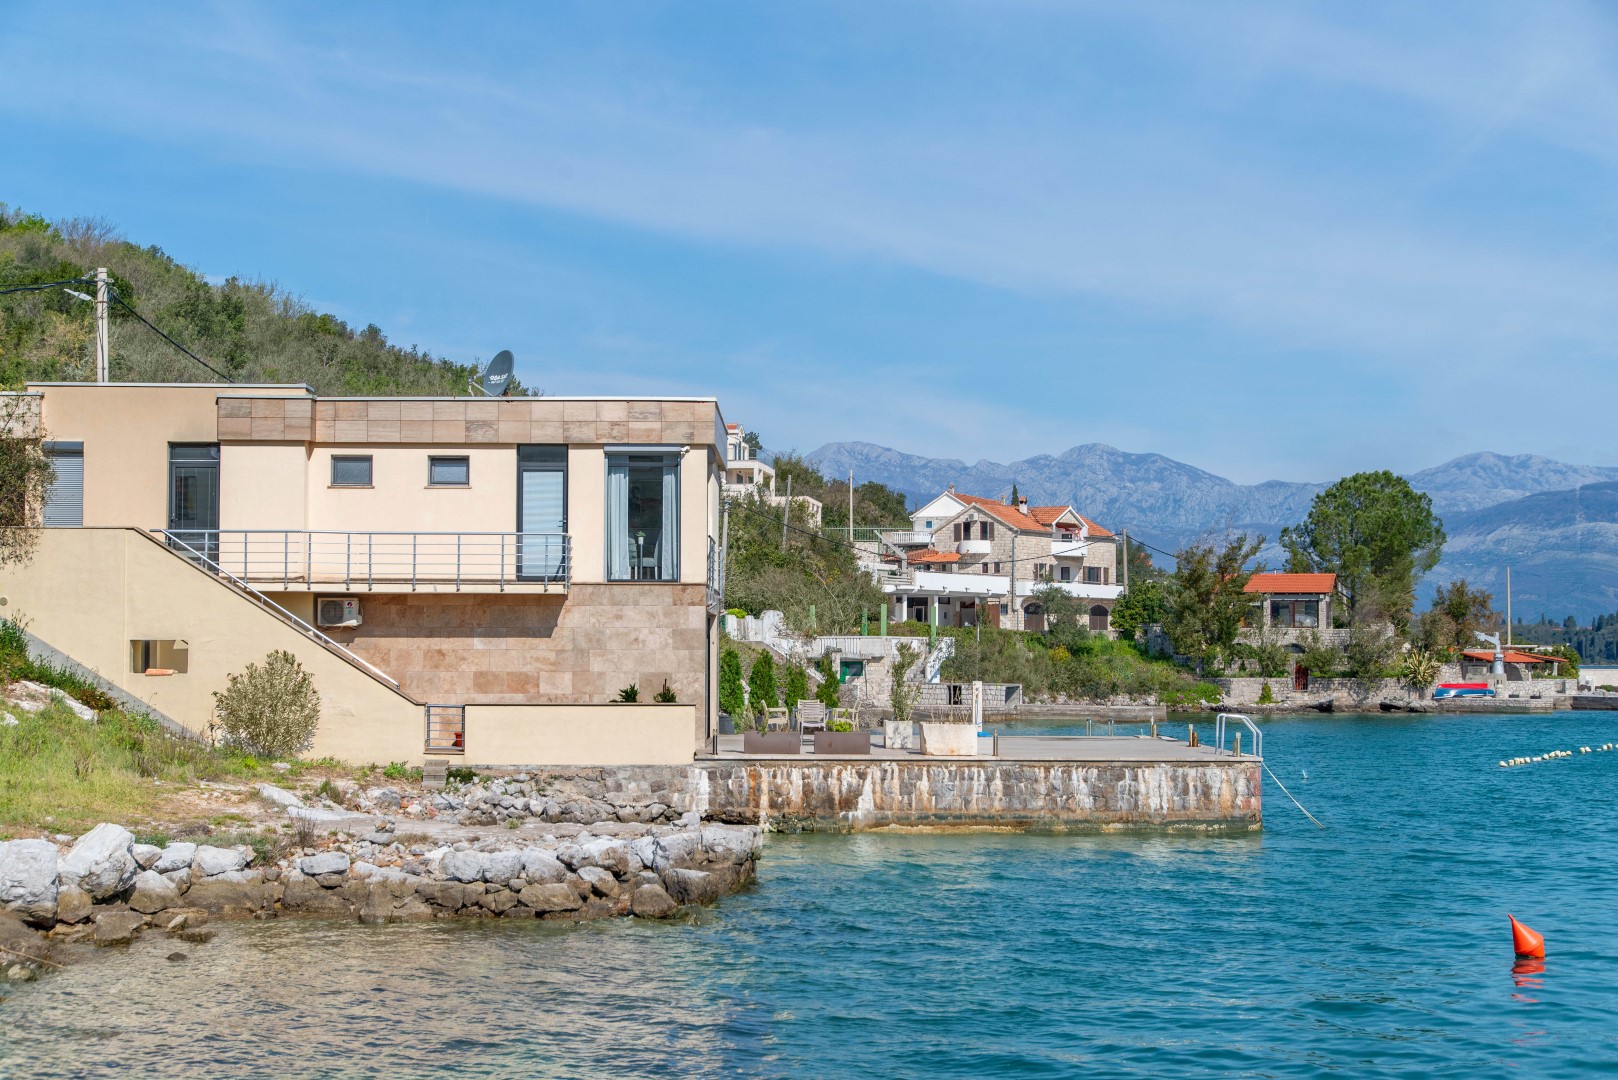 Luštica, Krtole – waterside house with 4 apartments and a jetty